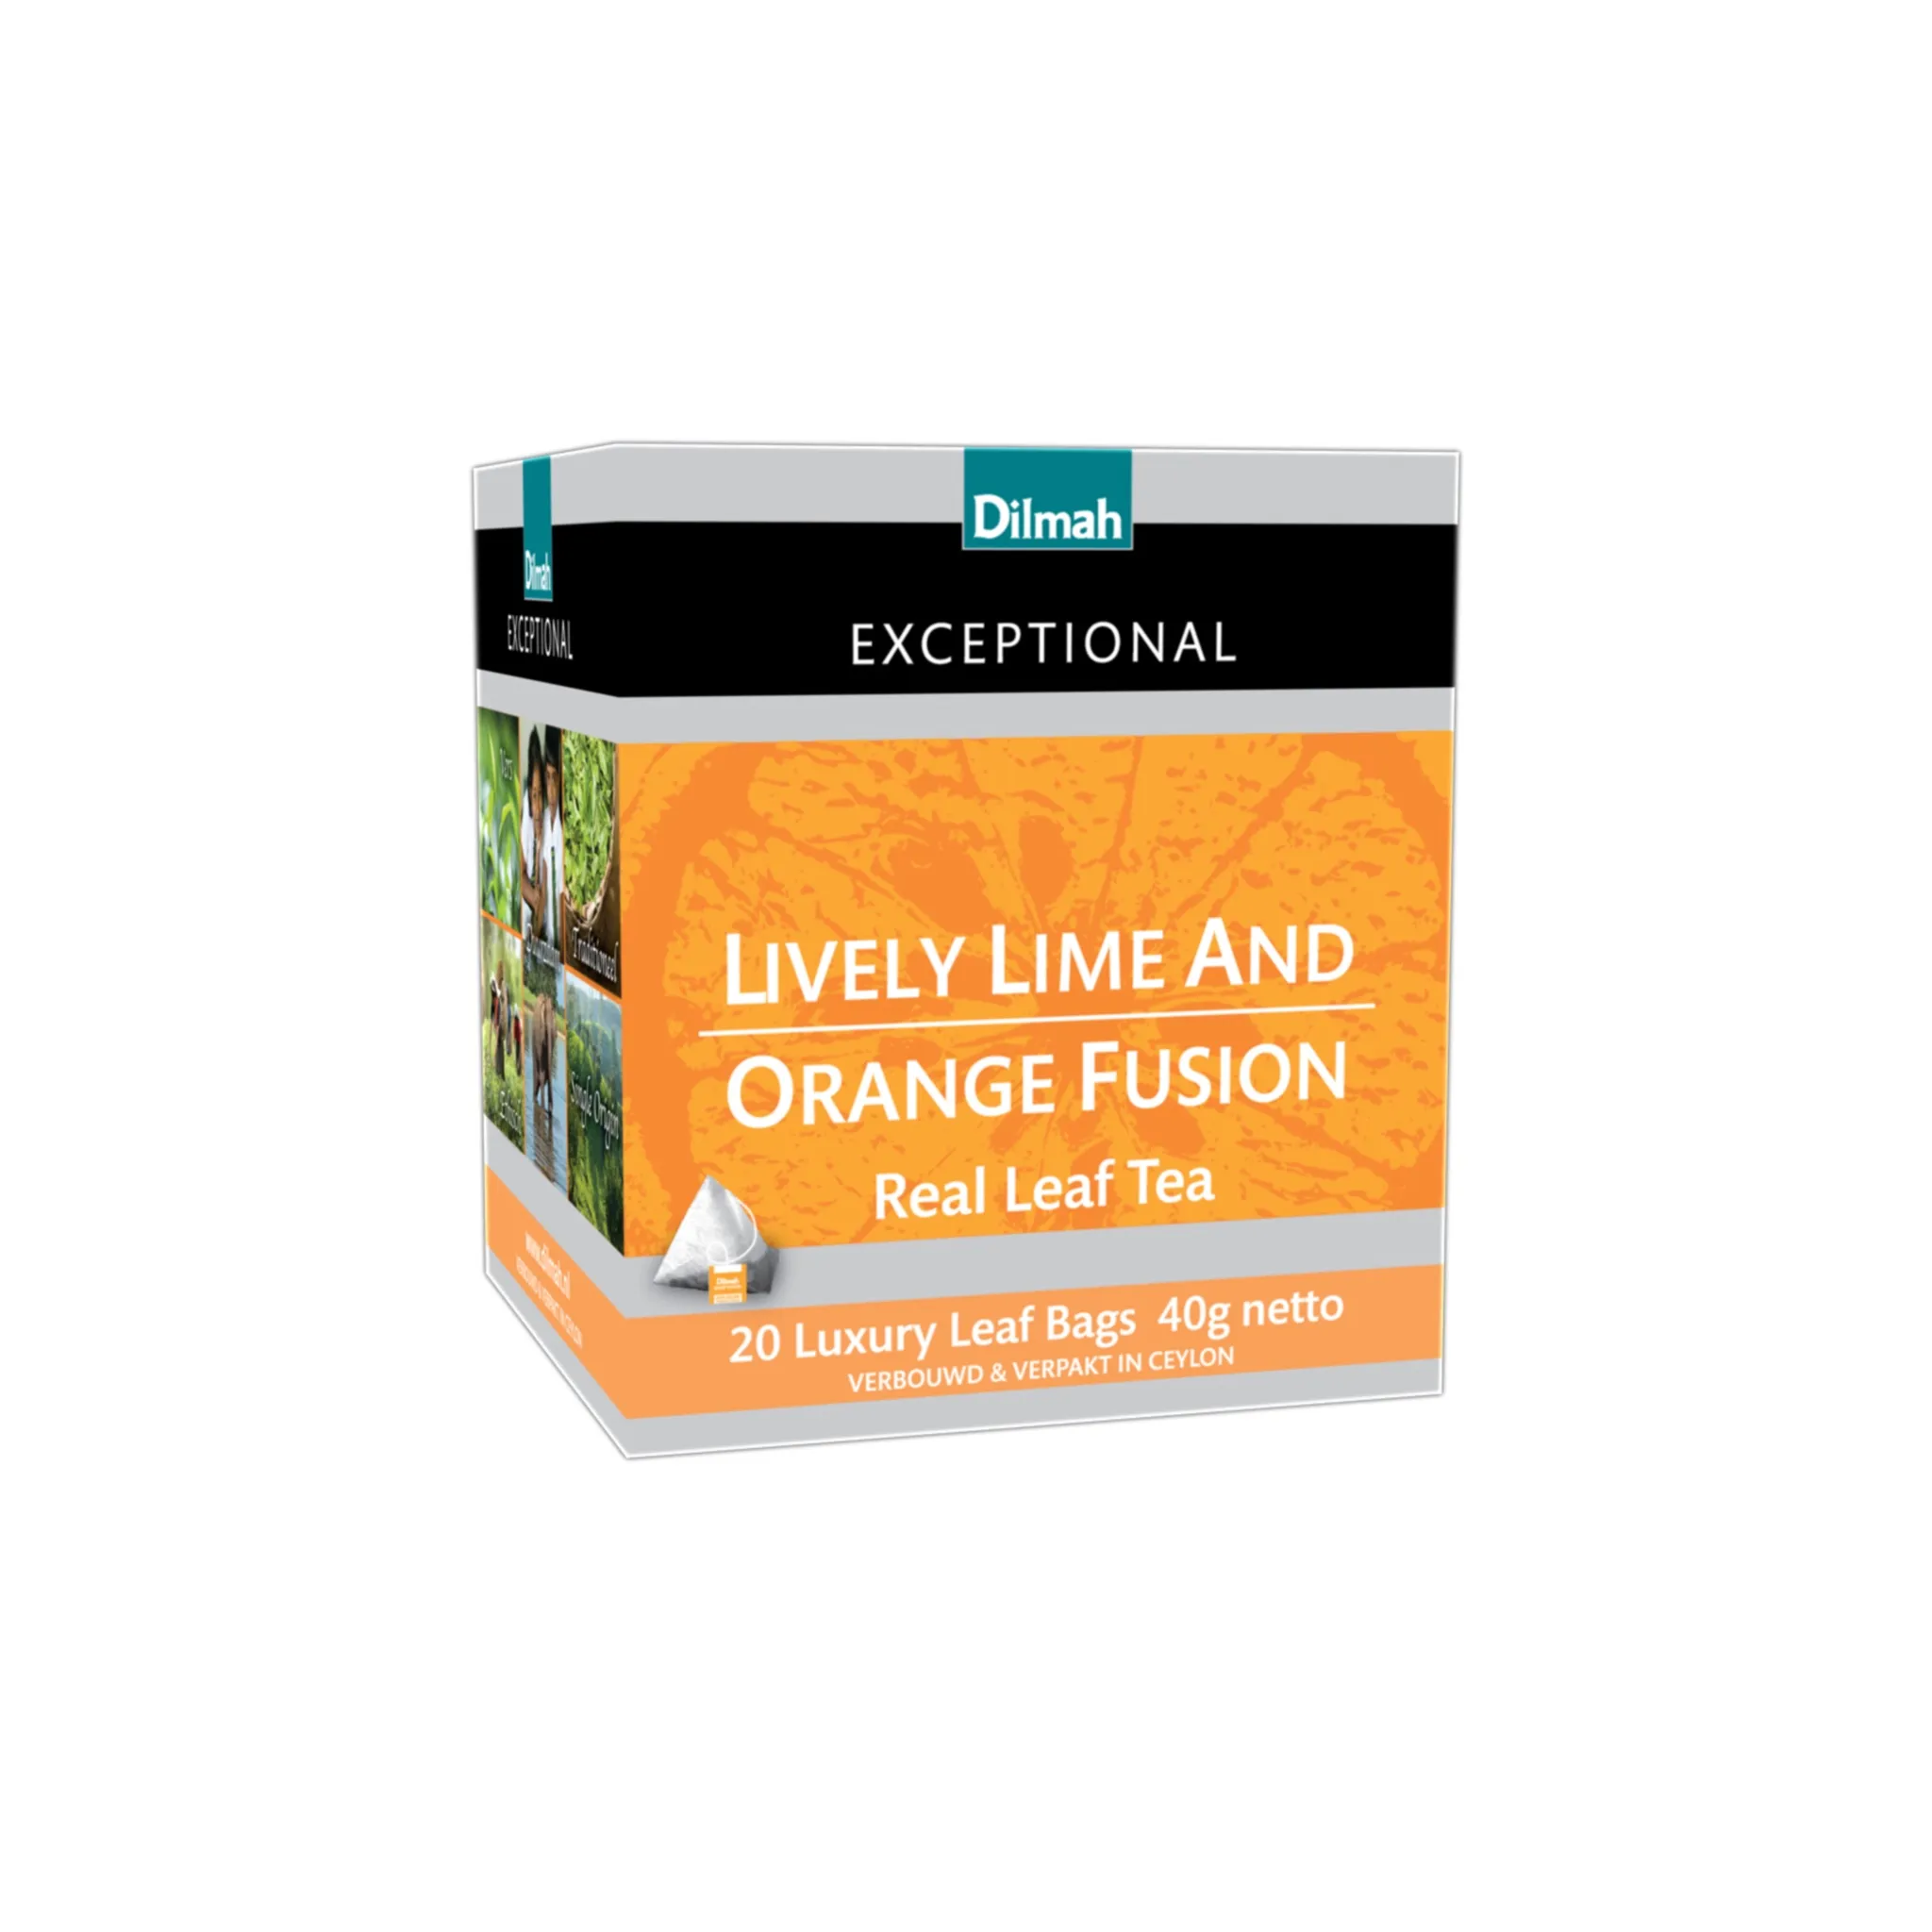 Pack of 20 tea bags of Lively lime and orange fusion